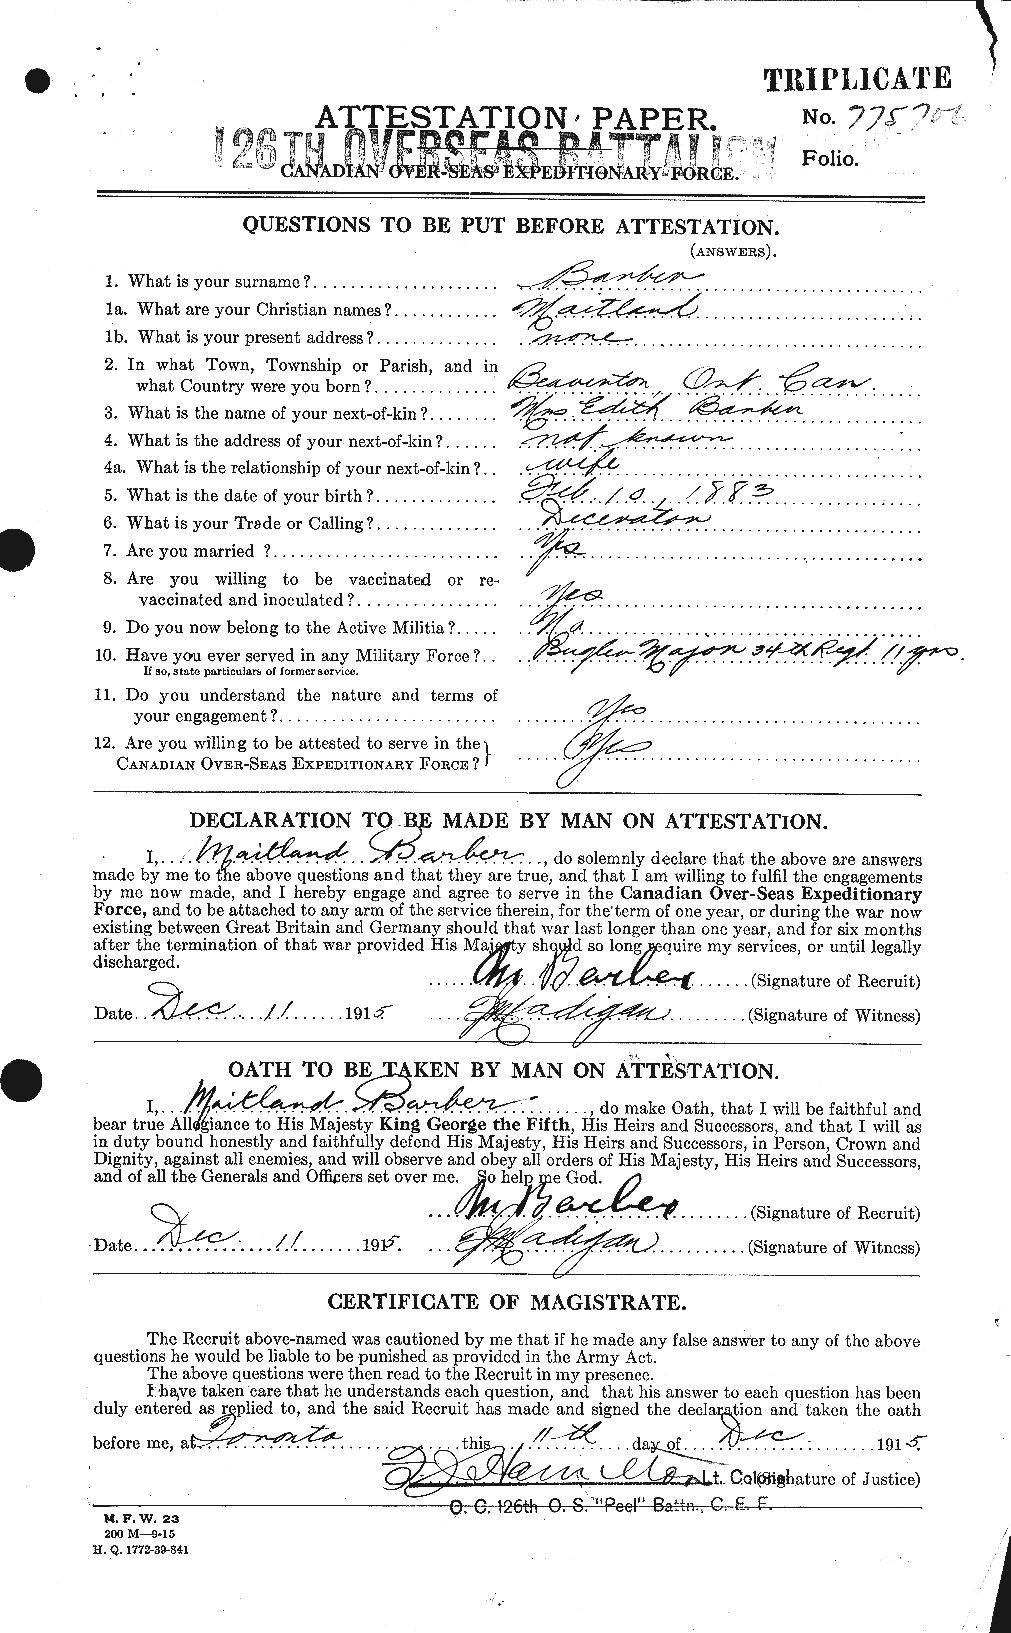 Personnel Records of the First World War - CEF 219067a